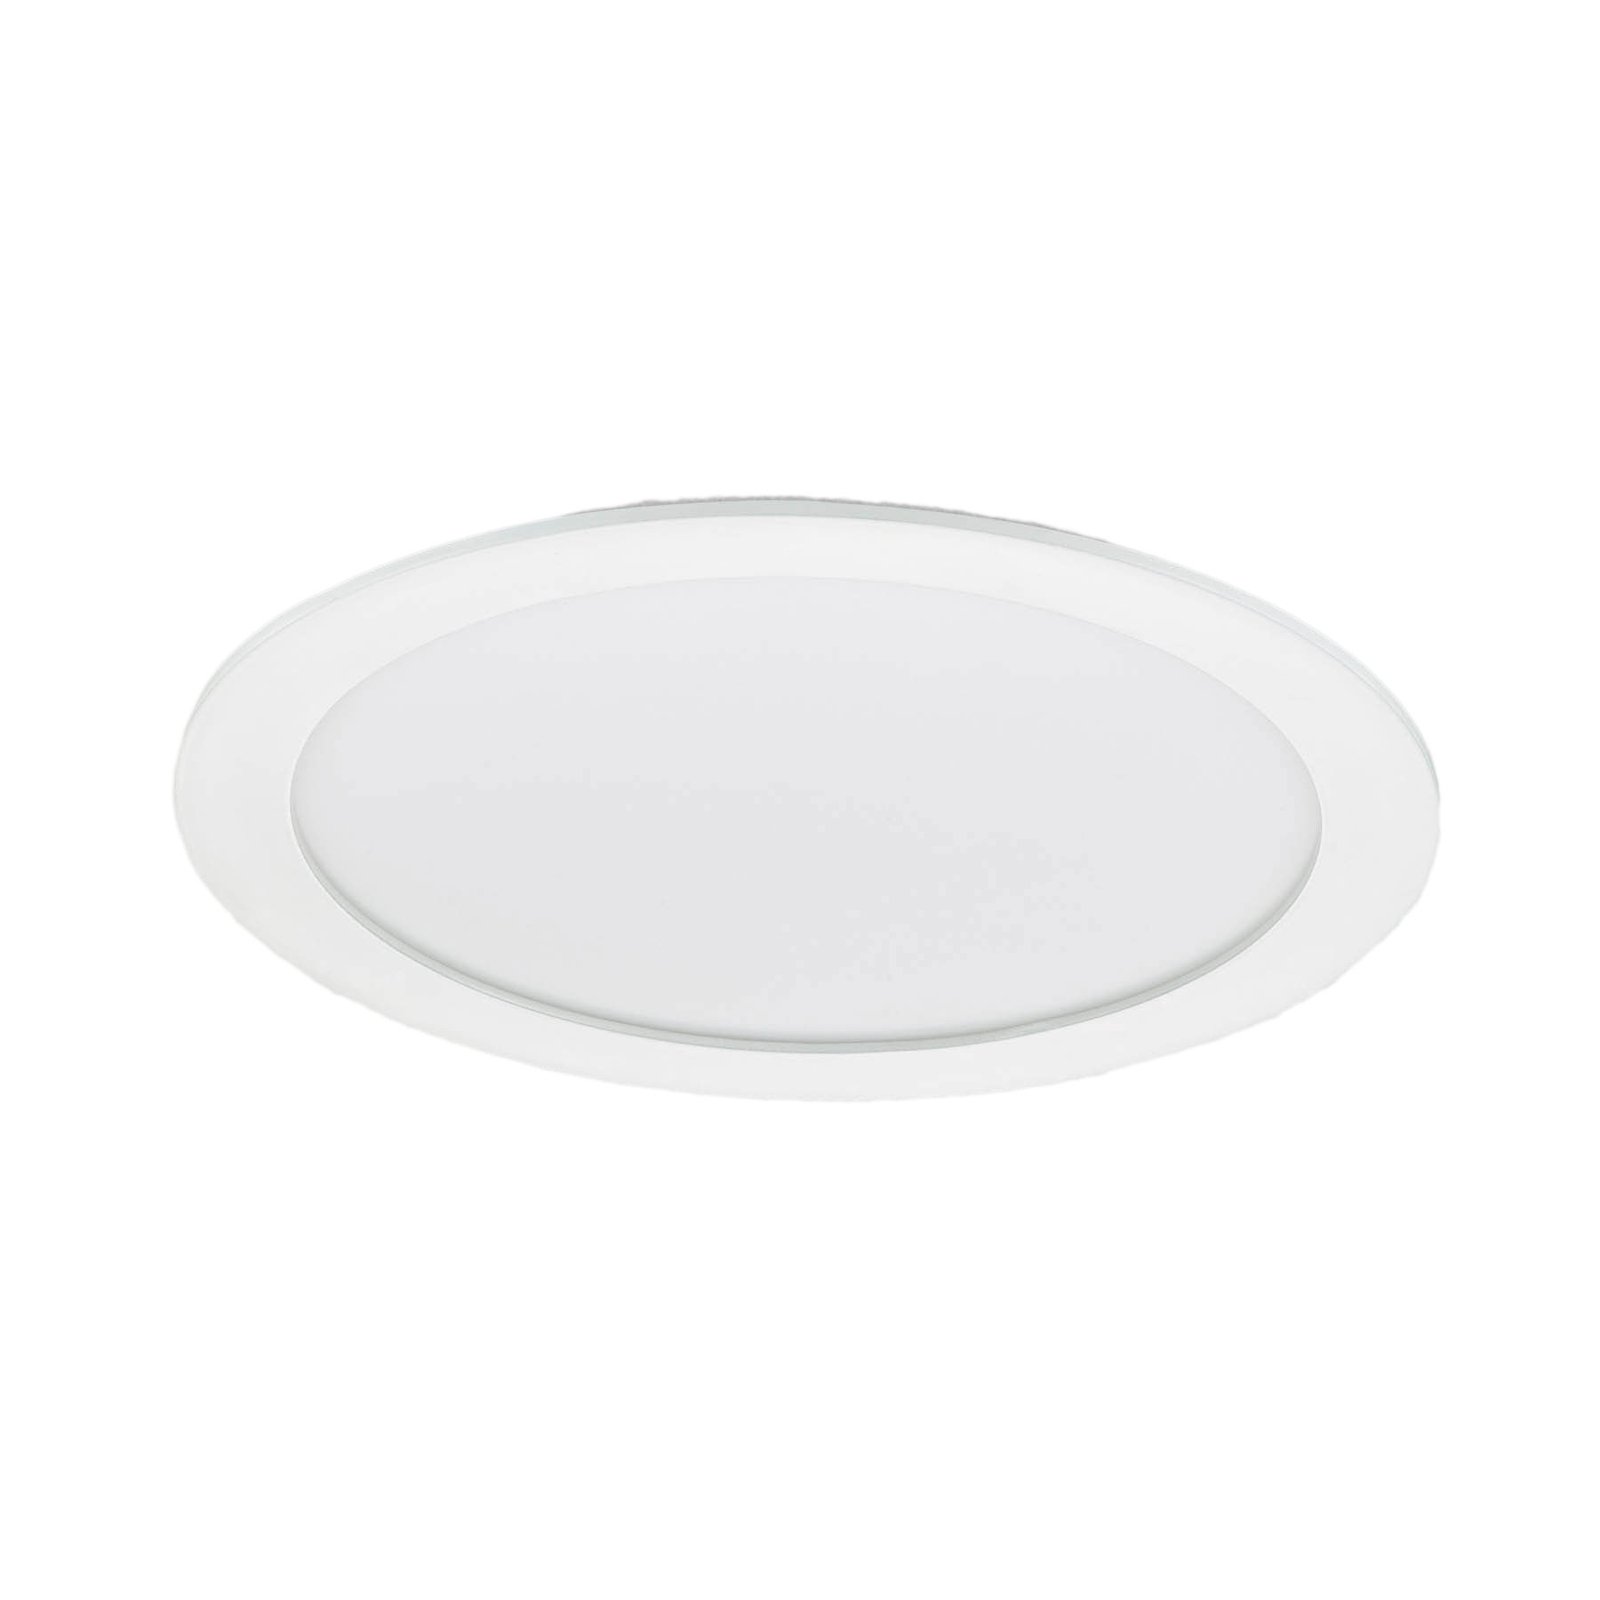 LED recessed downlight DN145B LED20S/840 PSU II WH